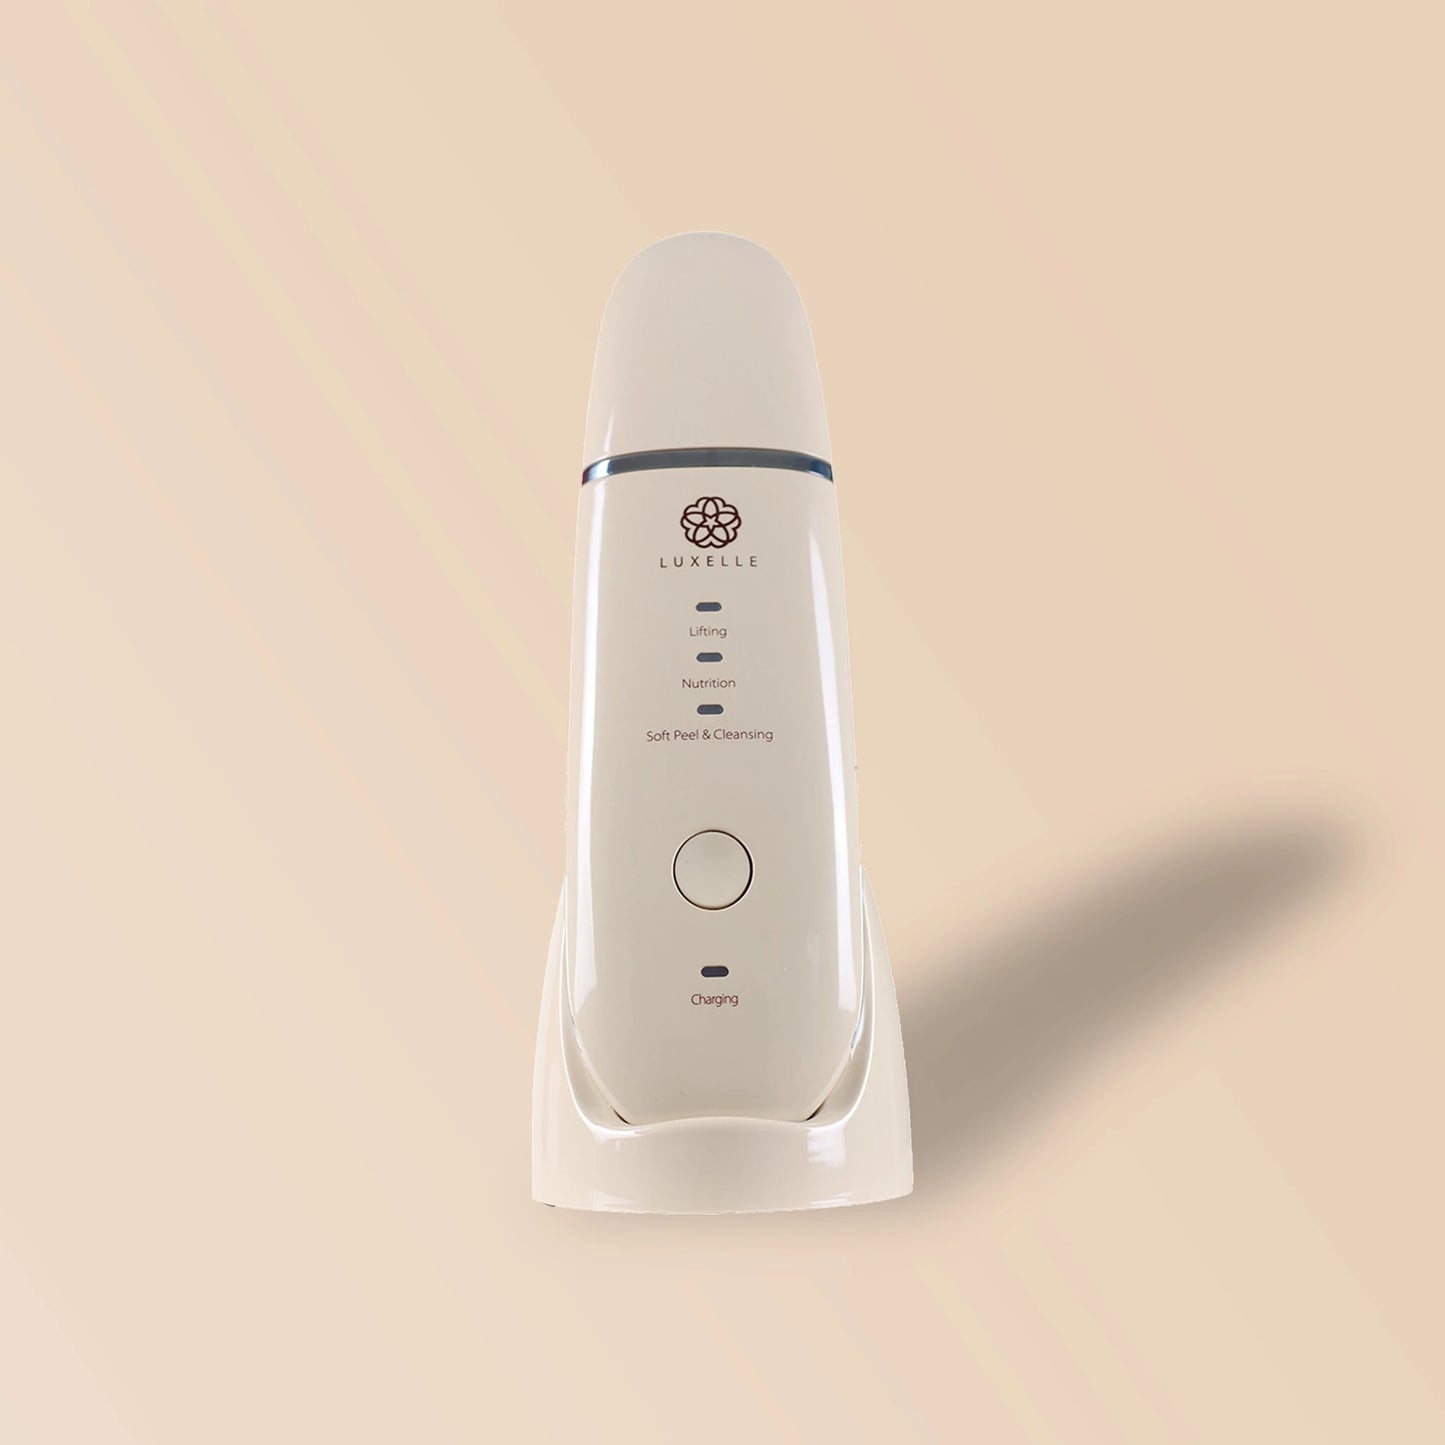 Luxelle Ultrasonic Soft Peel Device  Achieve gentle exfoliation and deep cleansing.